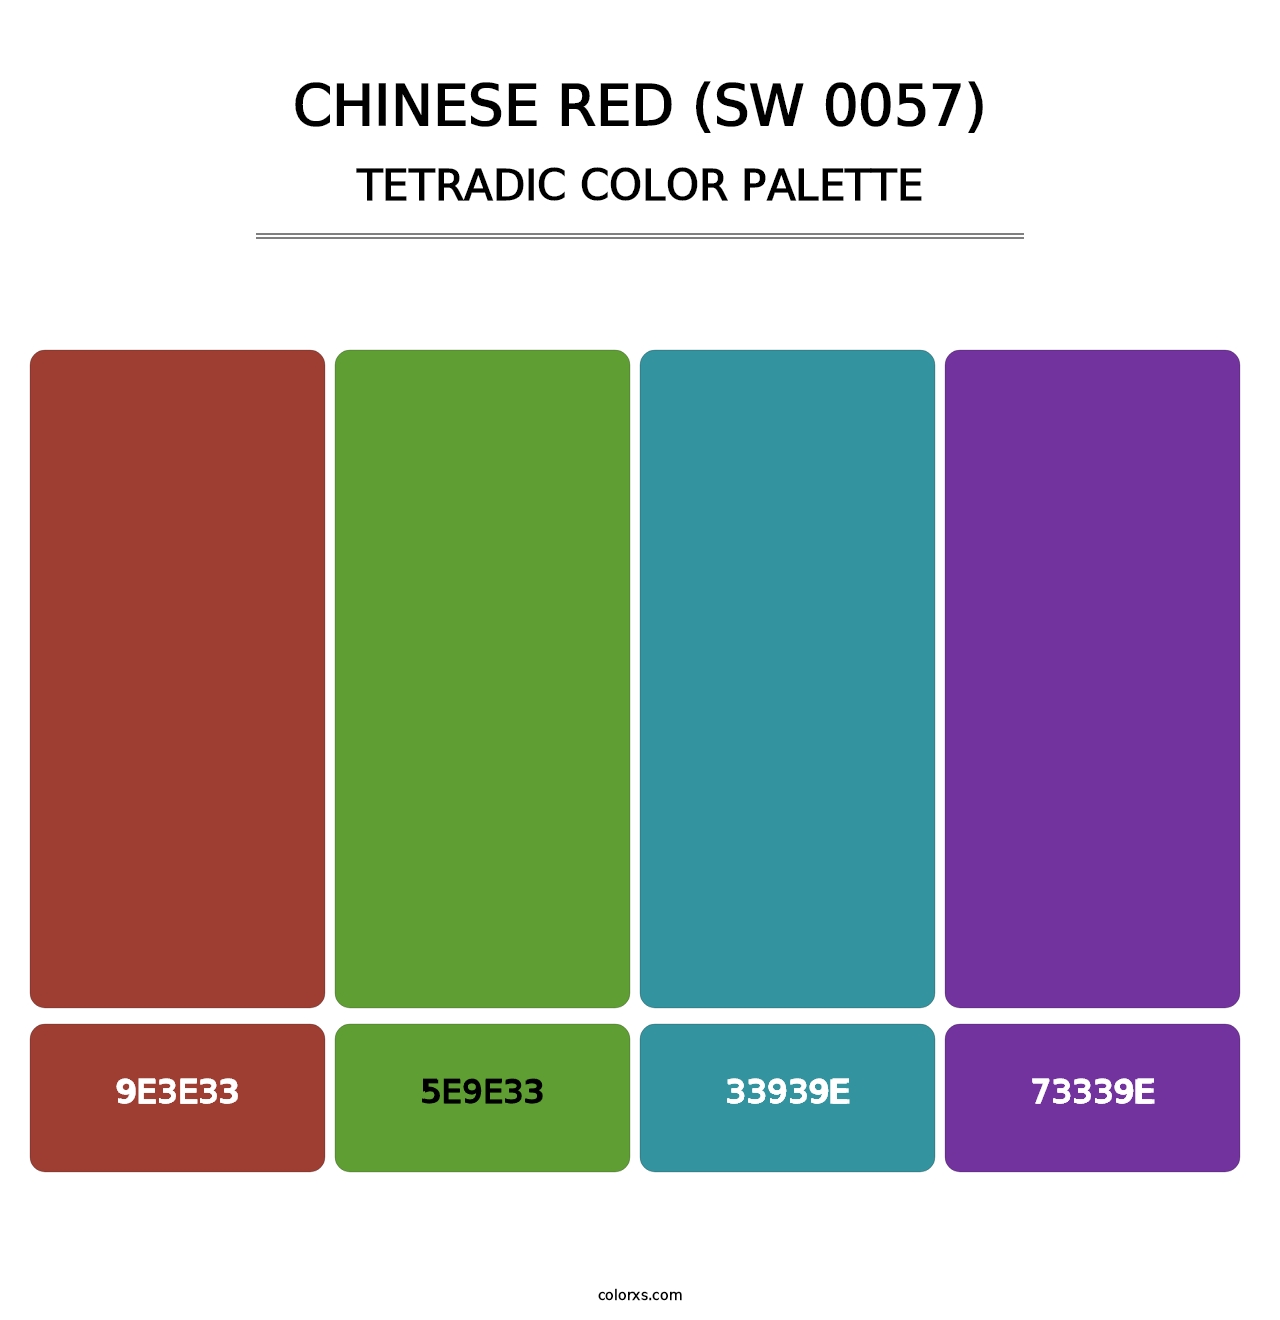 Chinese Red (SW 0057) - Tetradic Color Palette